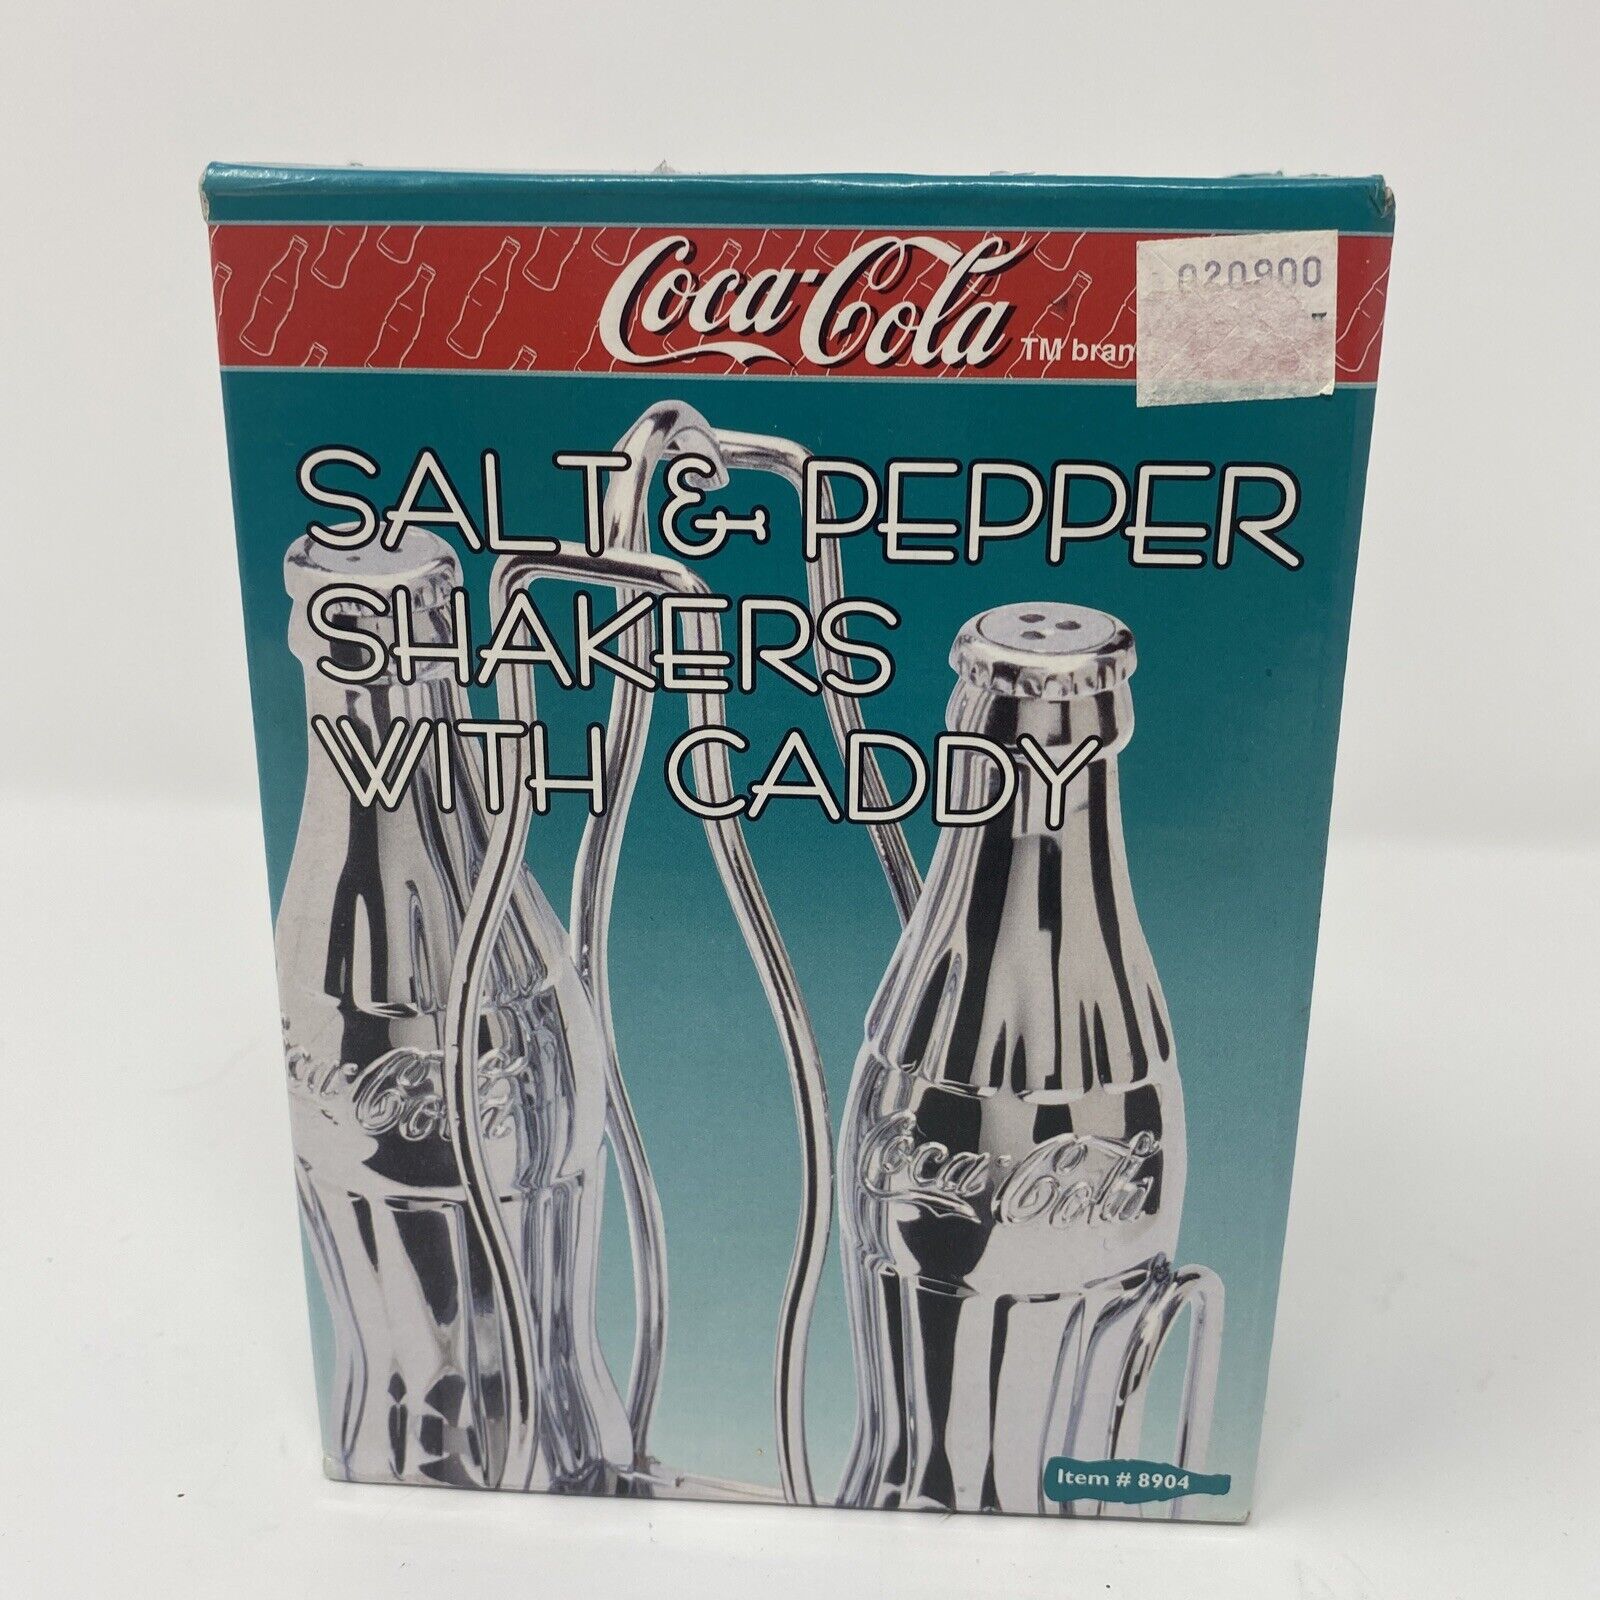 COCA COLA SALT & PEPPER SHAKERS With CADDY Chrome